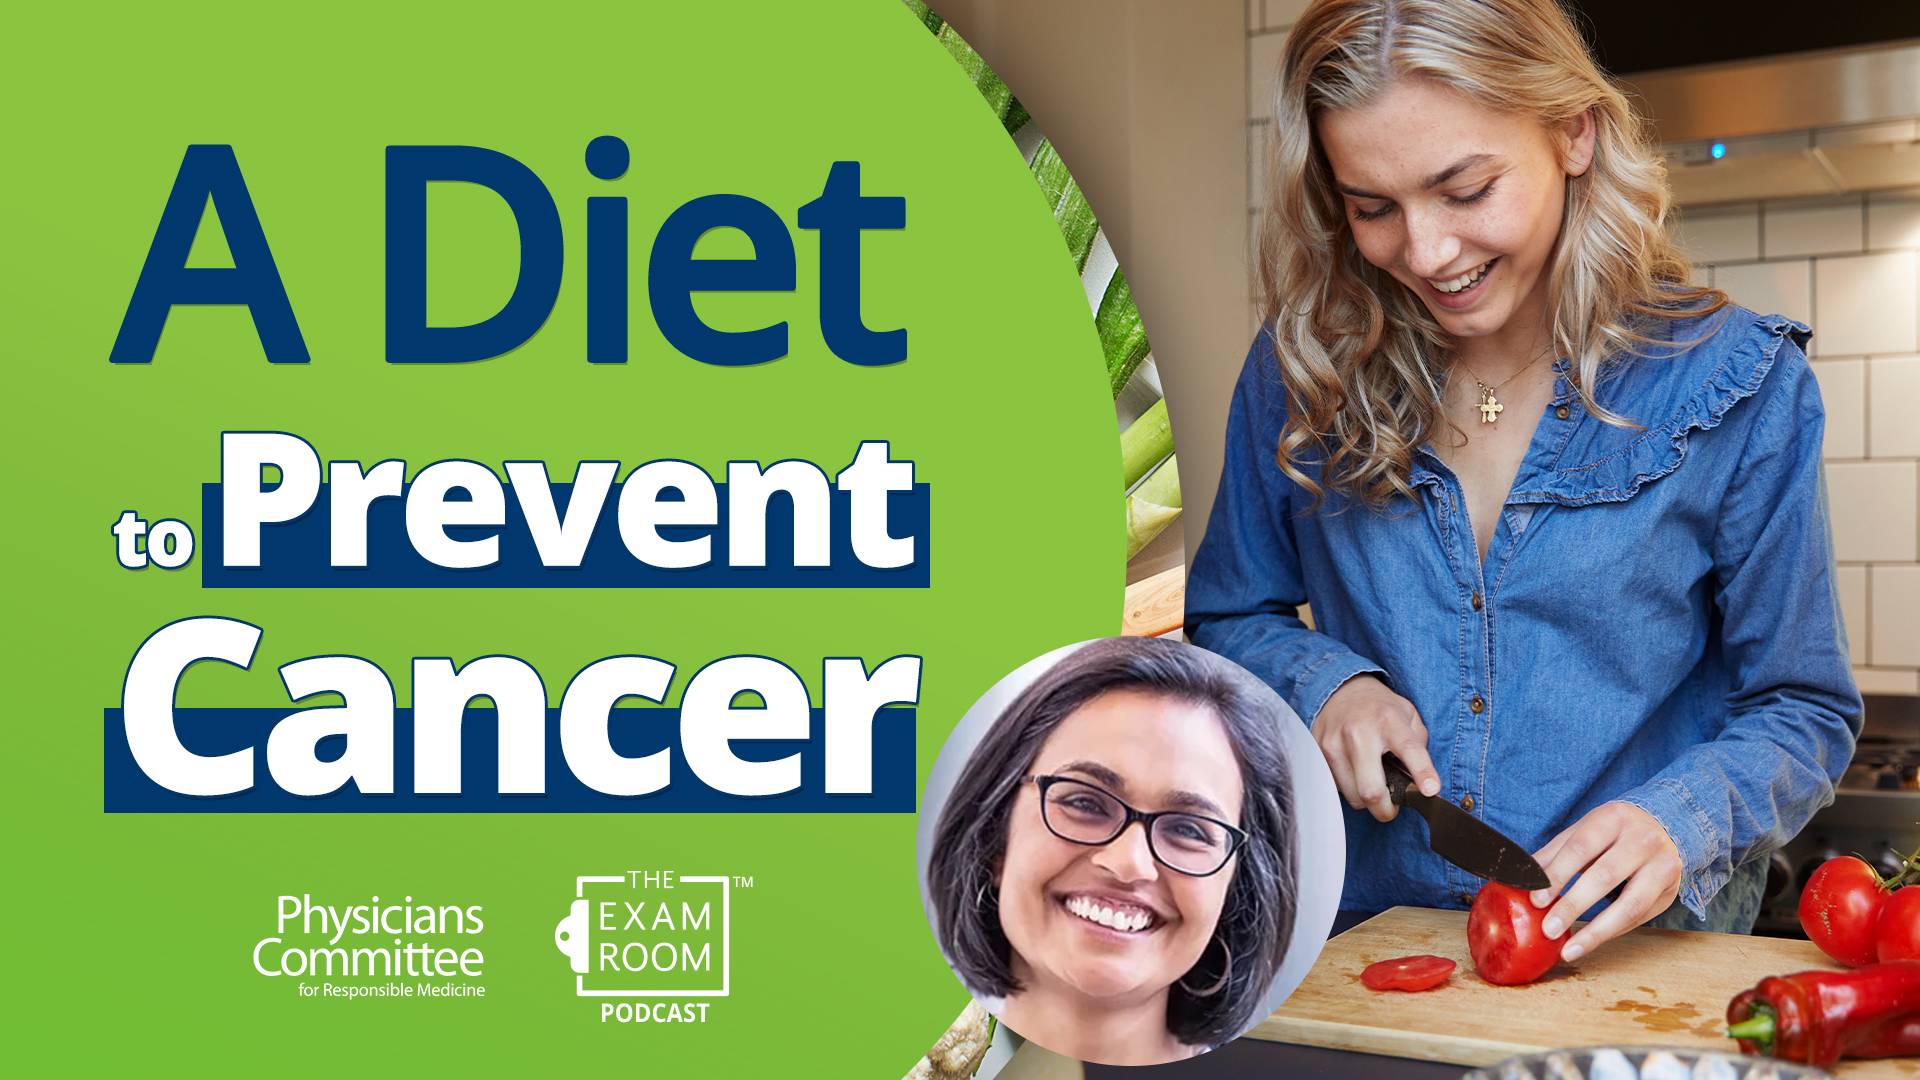 The Diet to Prevent and Survive Cancer